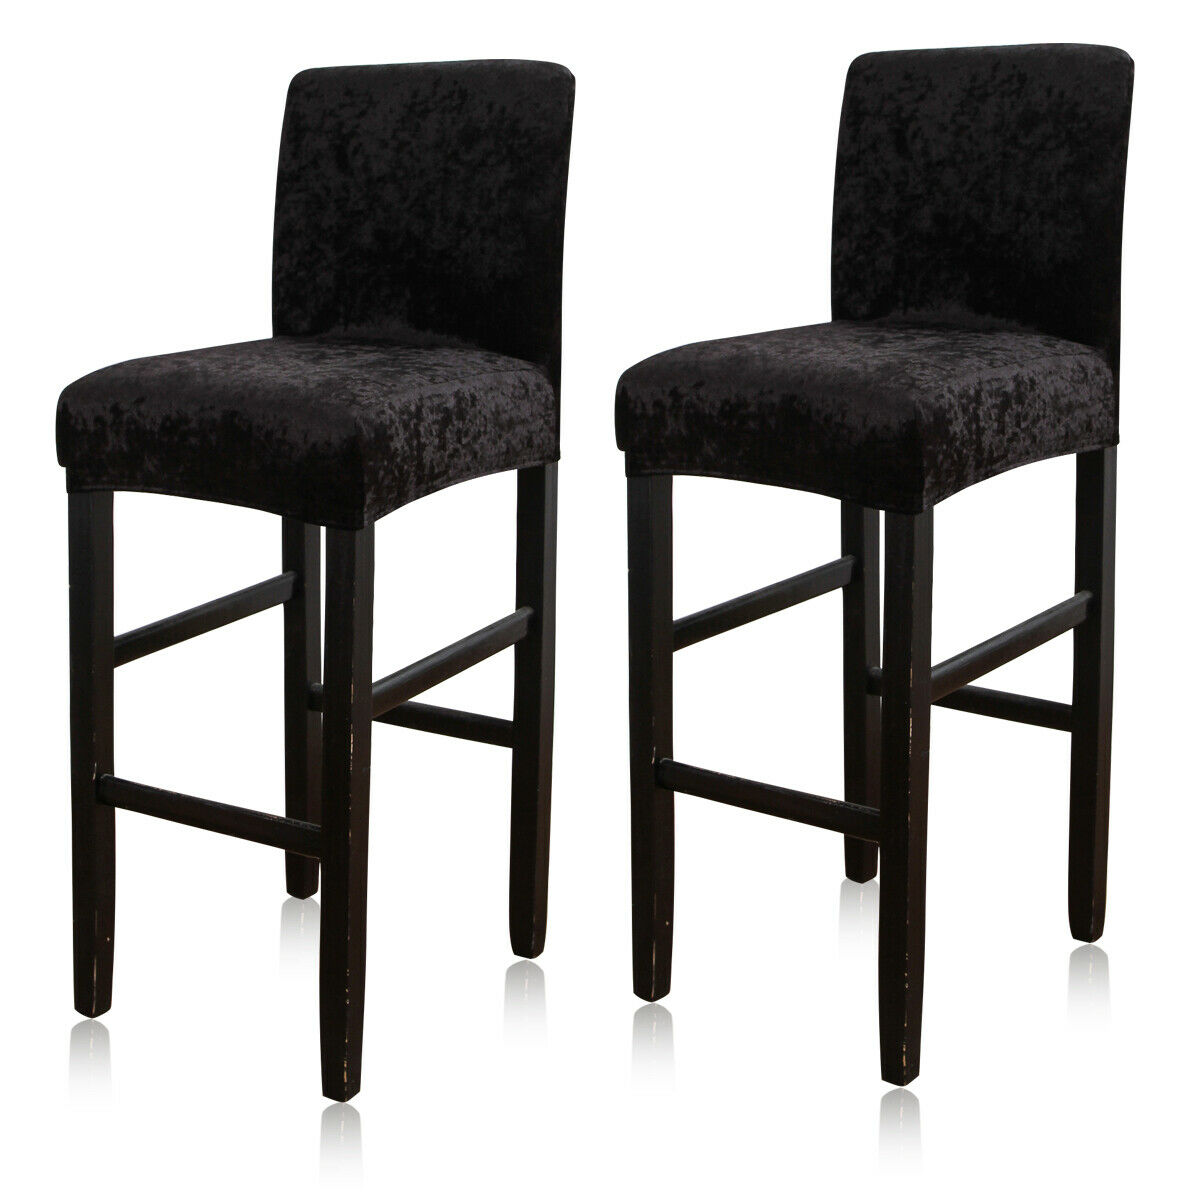 Details about   Elastic Velvet Bar Chair Cover High Stool Seat Protector Slipcover  for Banquet 